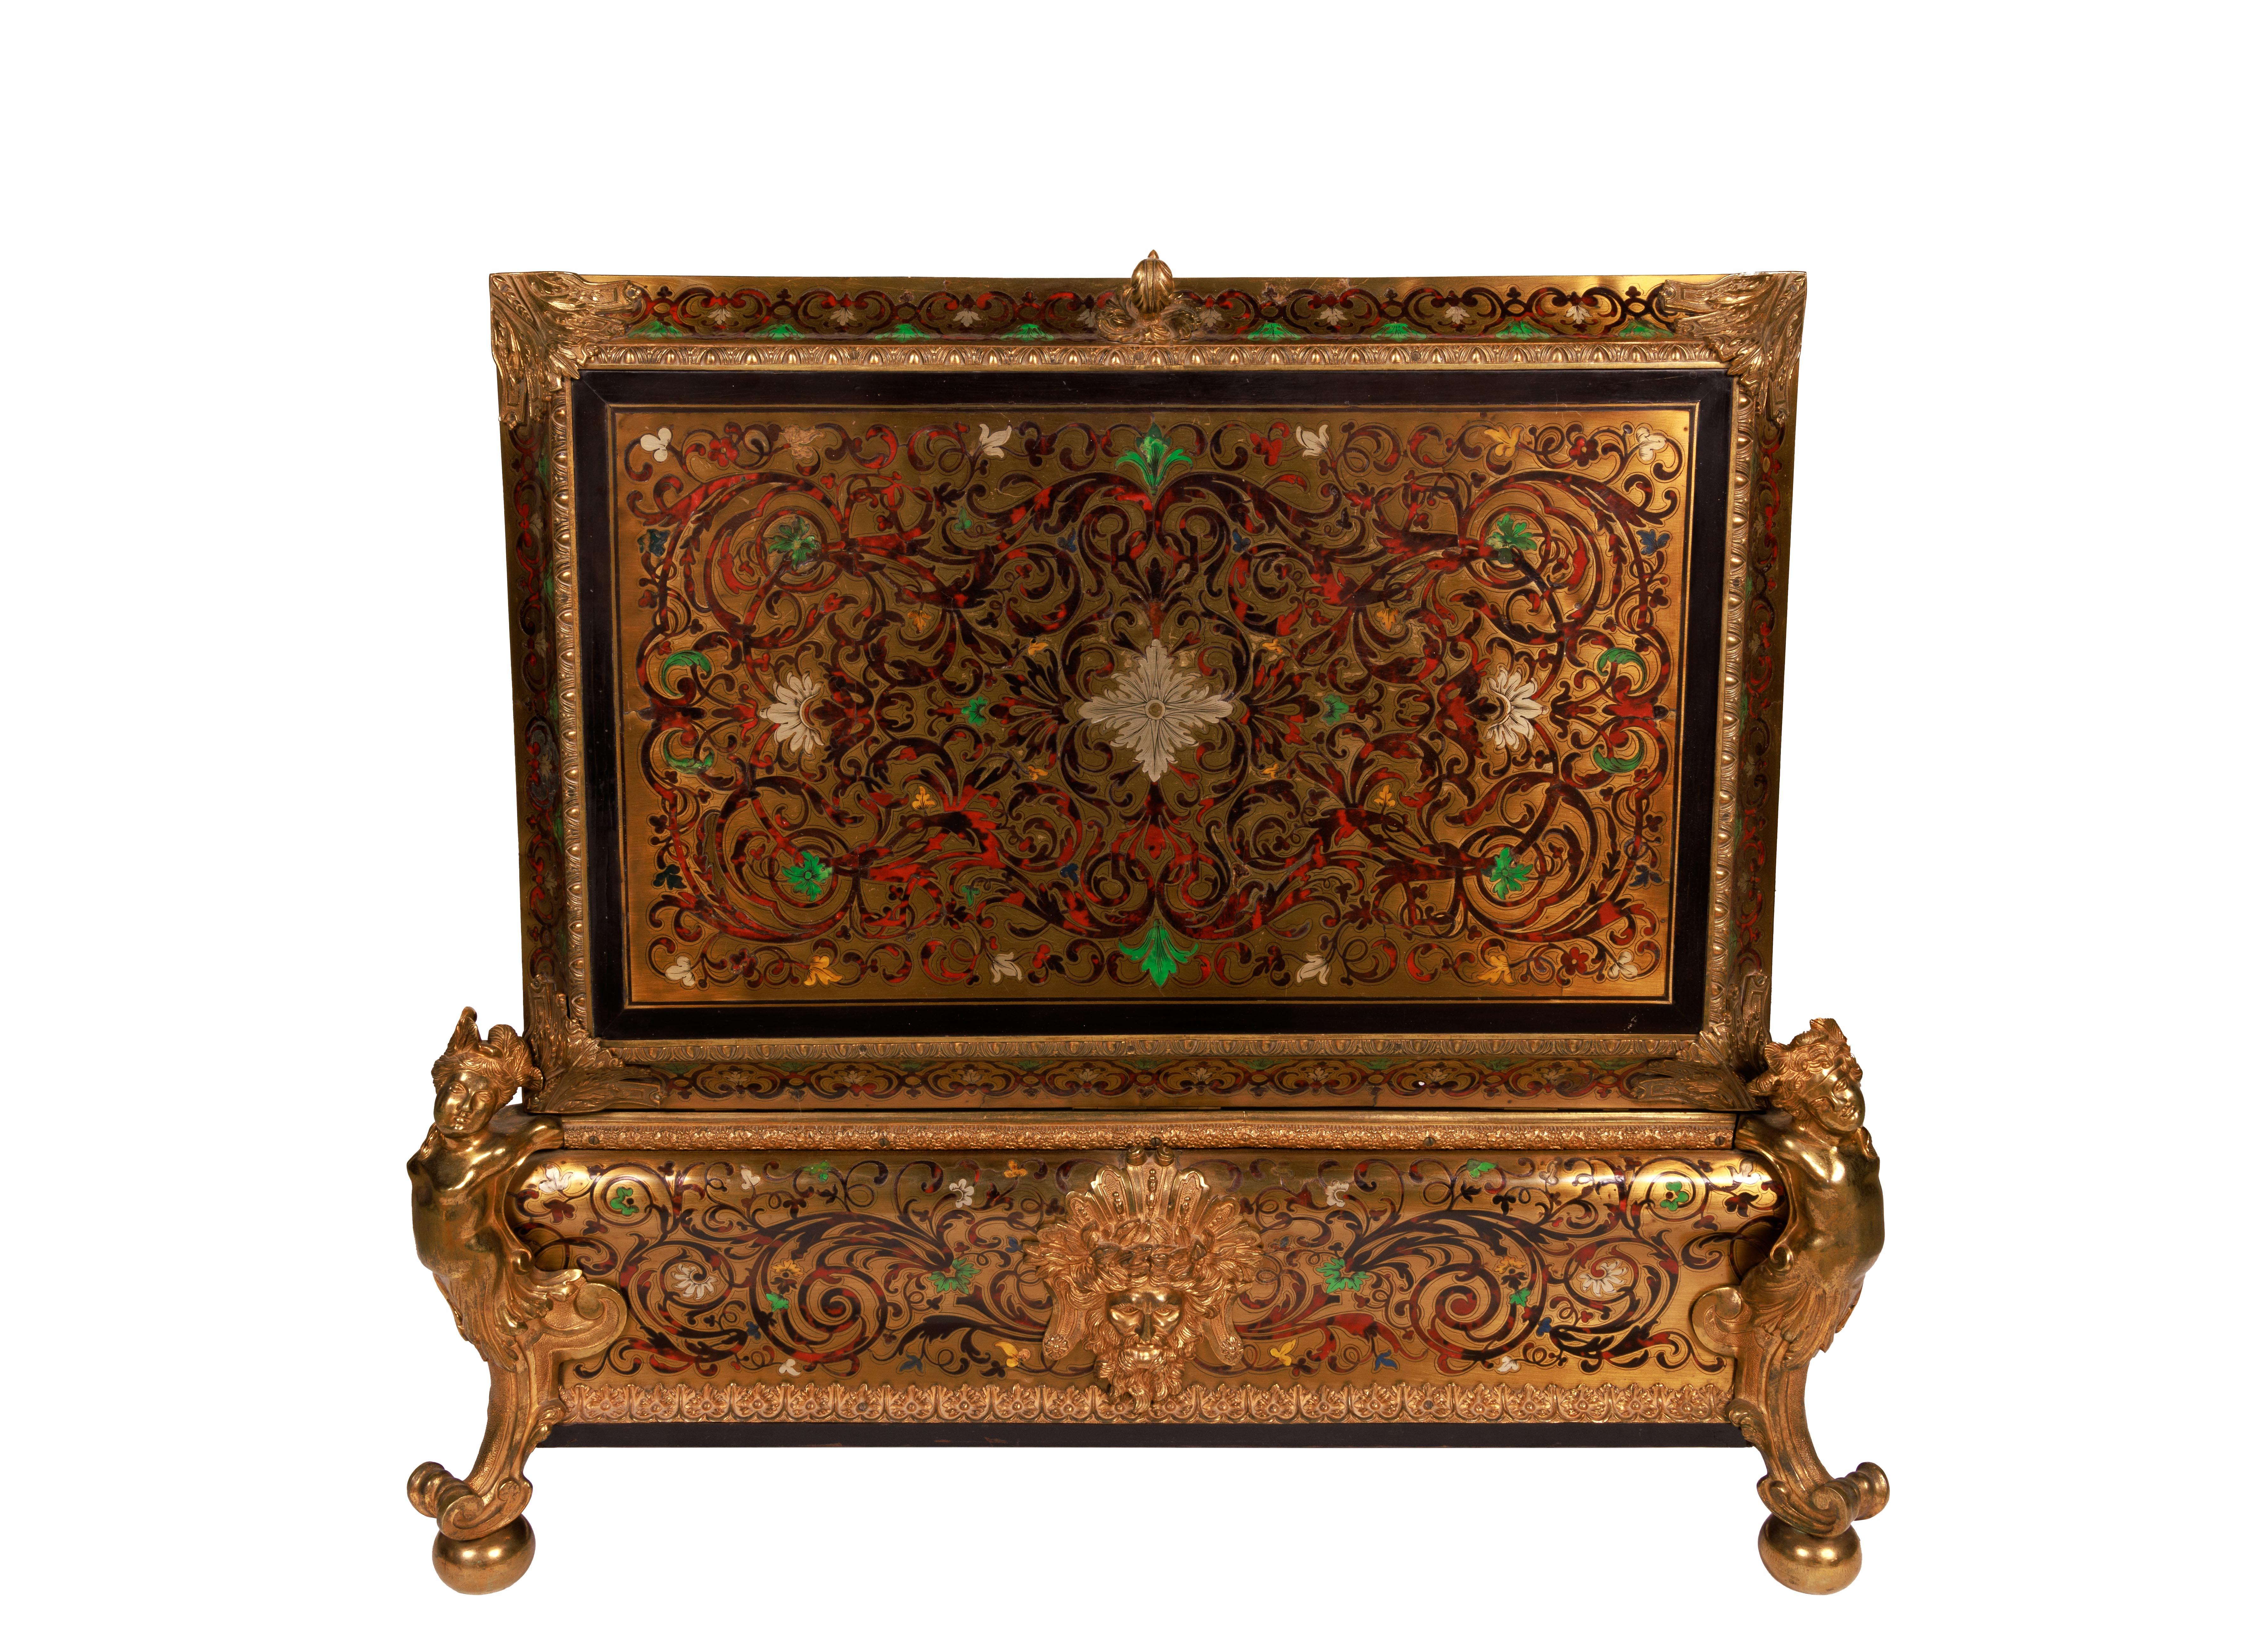 Monumental Louis XIV Style Gilt-Bronze Mounted Boulle Marquetry Casket Box For Sale 5